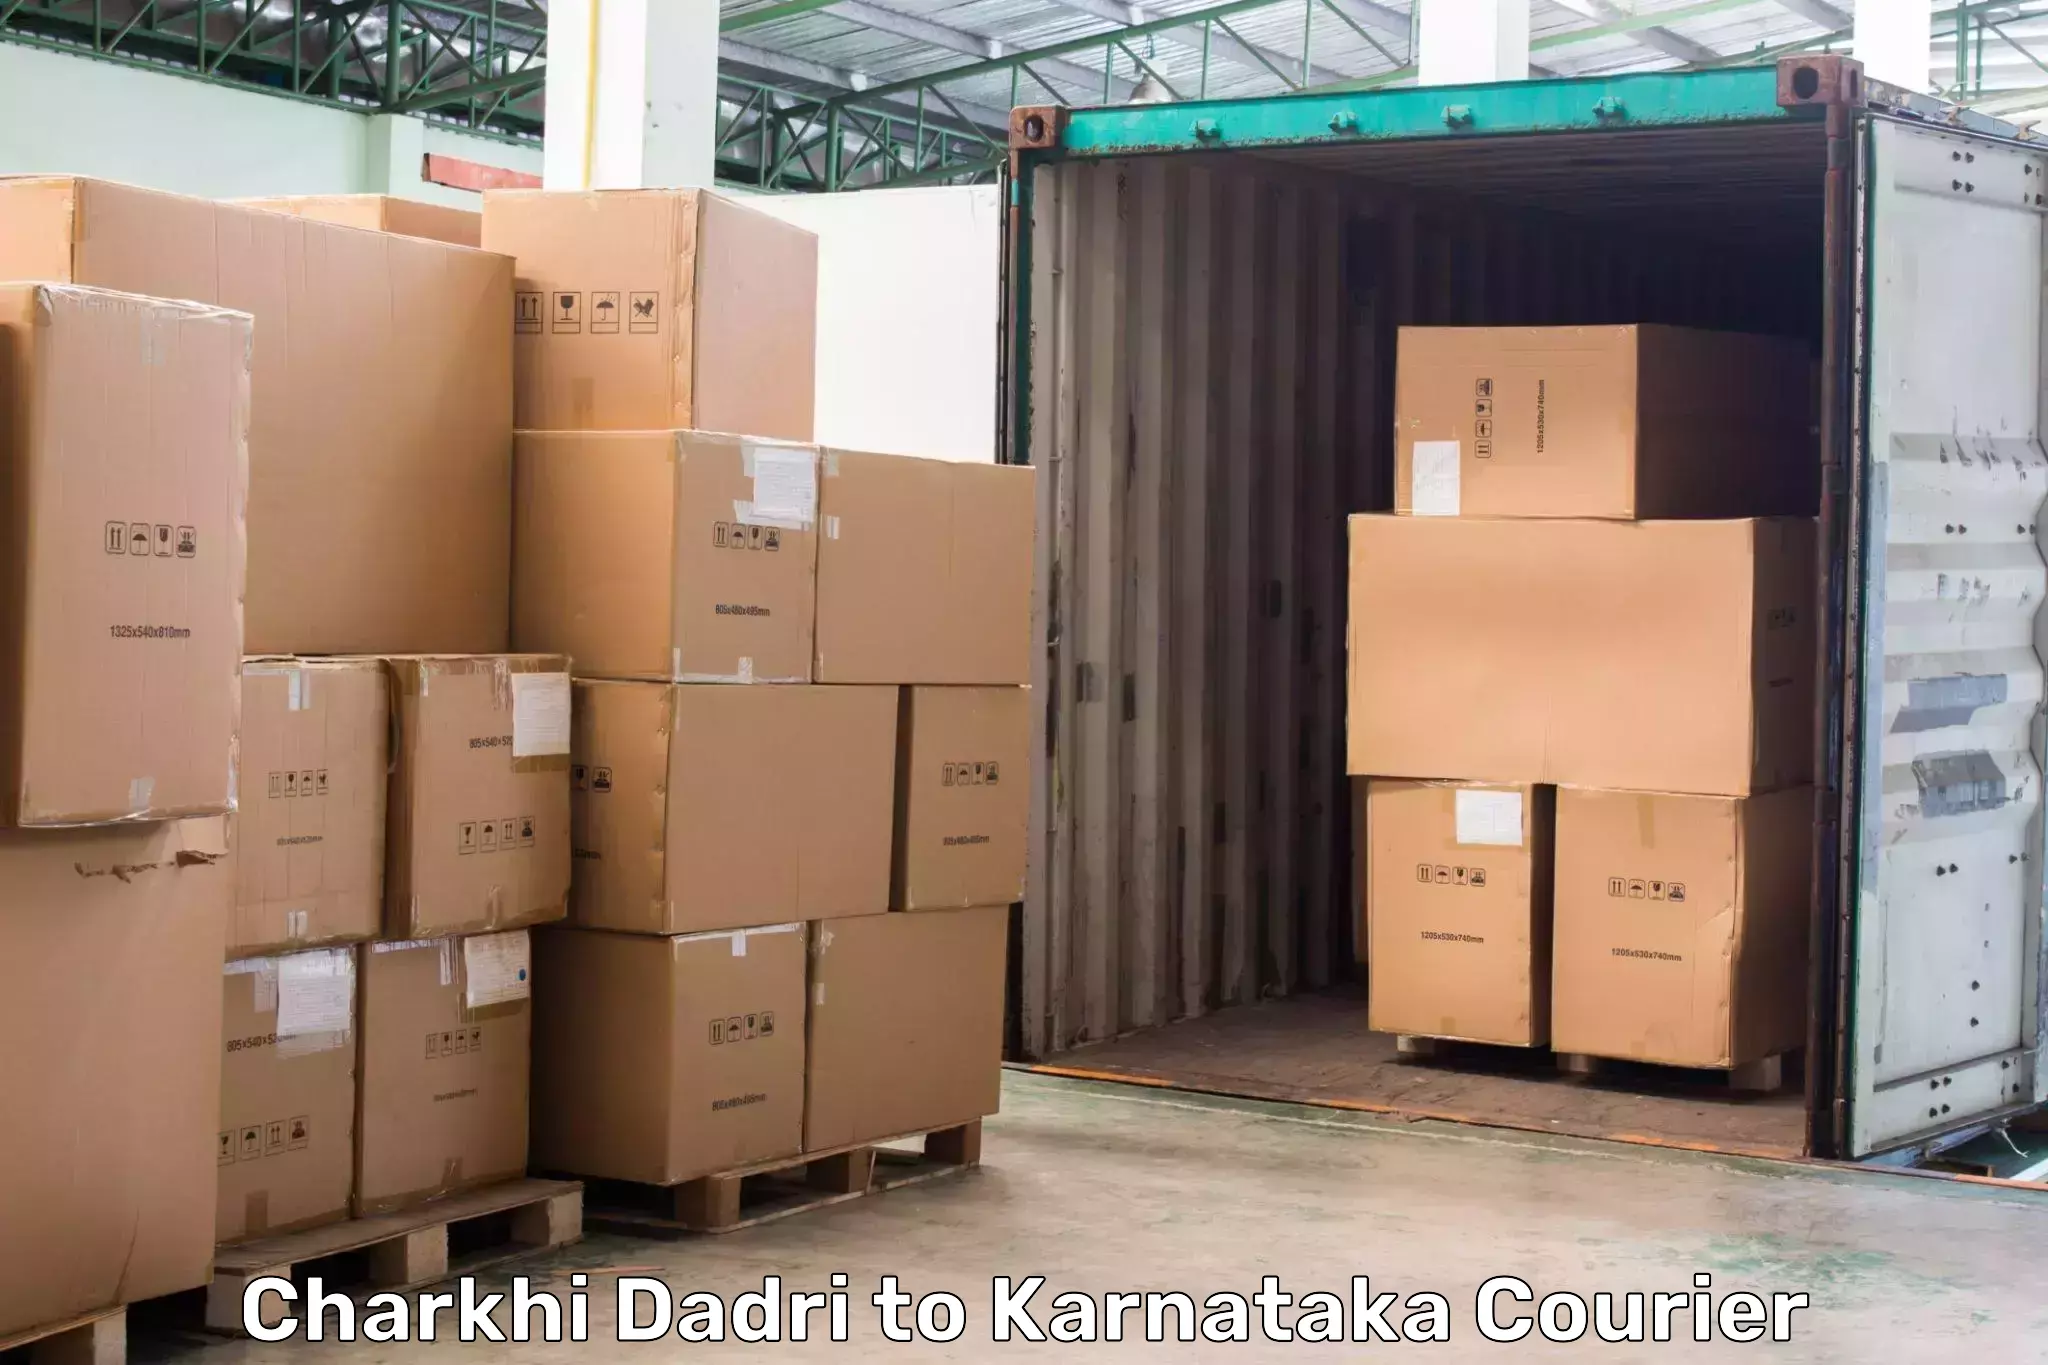 Same-day delivery solutions Charkhi Dadri to Anavatti